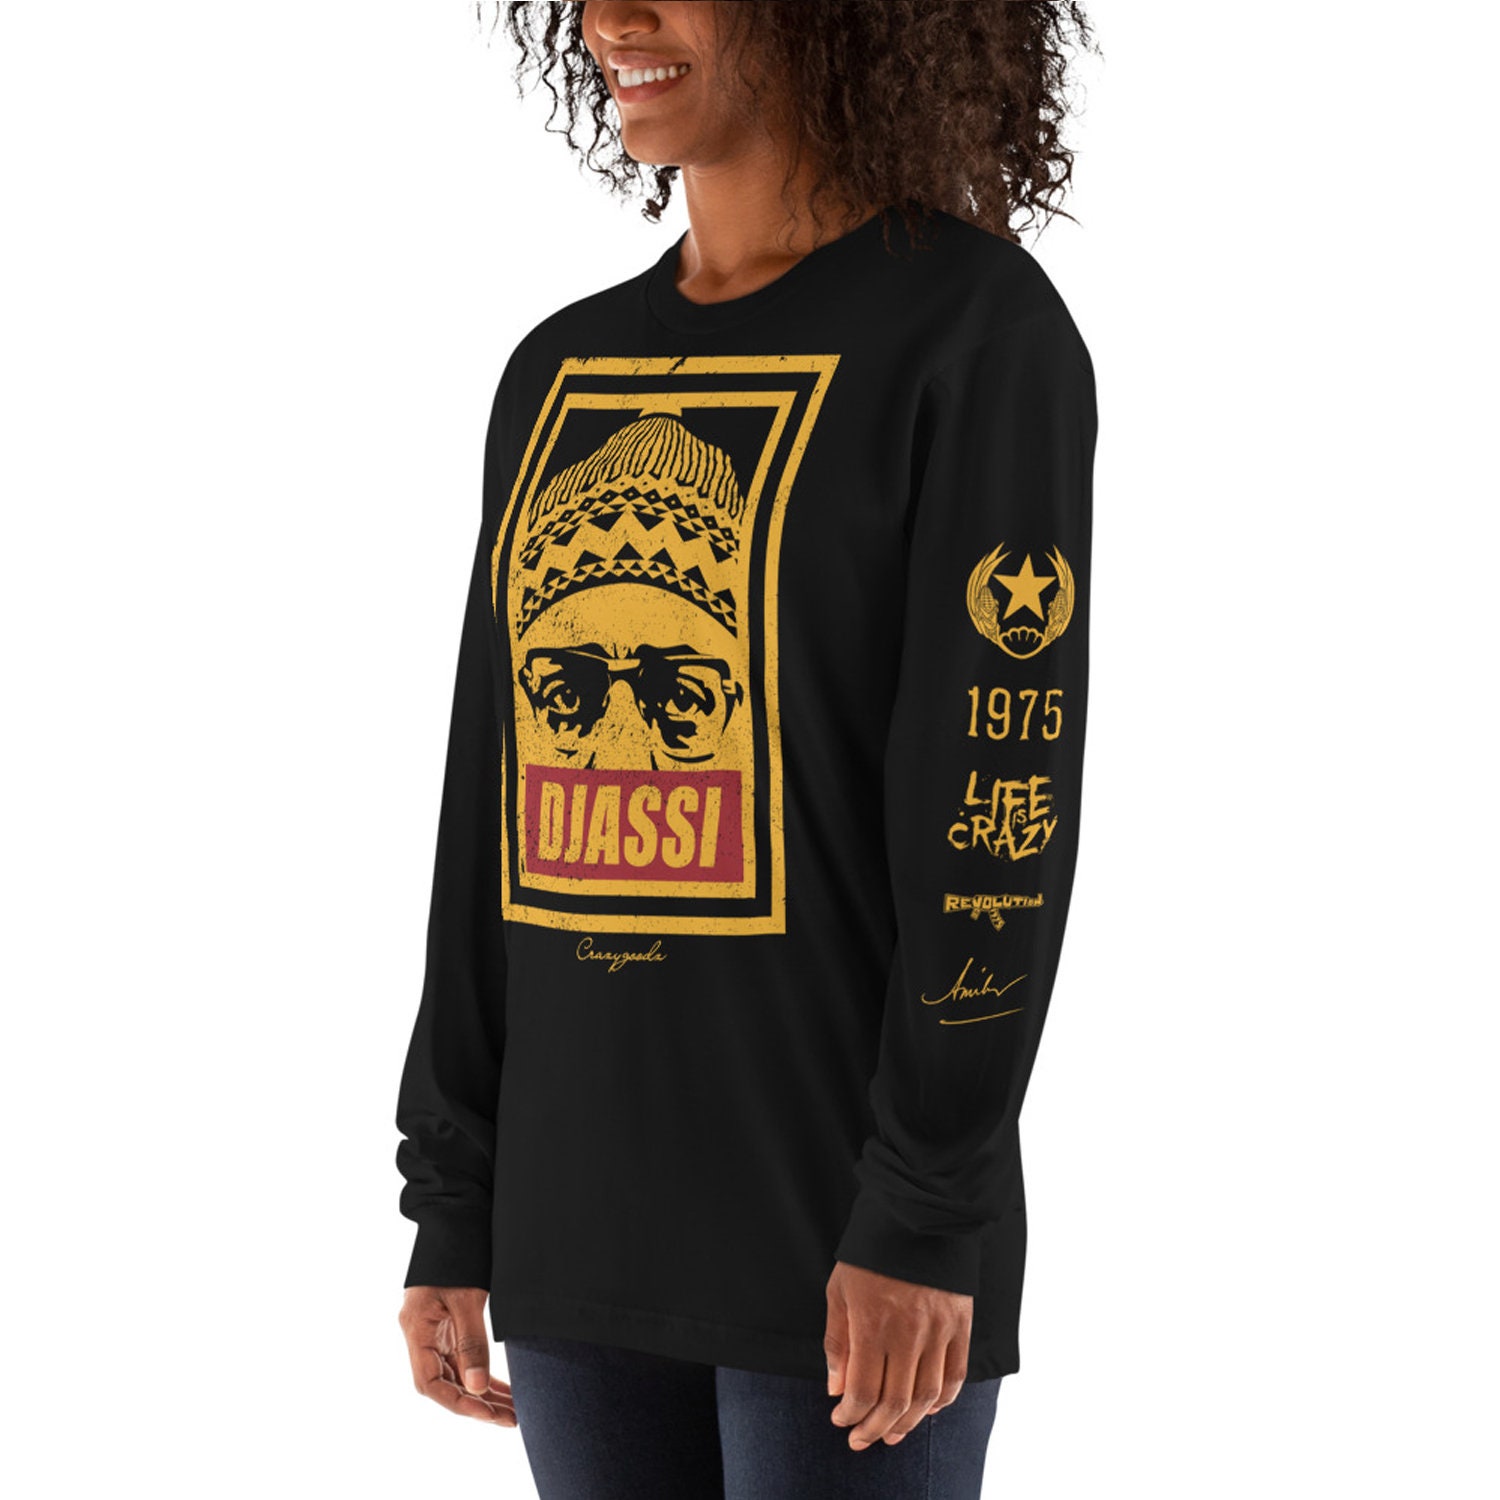 Cabralista Revolutionary Leaders Vintage 'Abel Djassi' Long sleeve t-shirt Amilcar Cabral Shirt African Culture tee